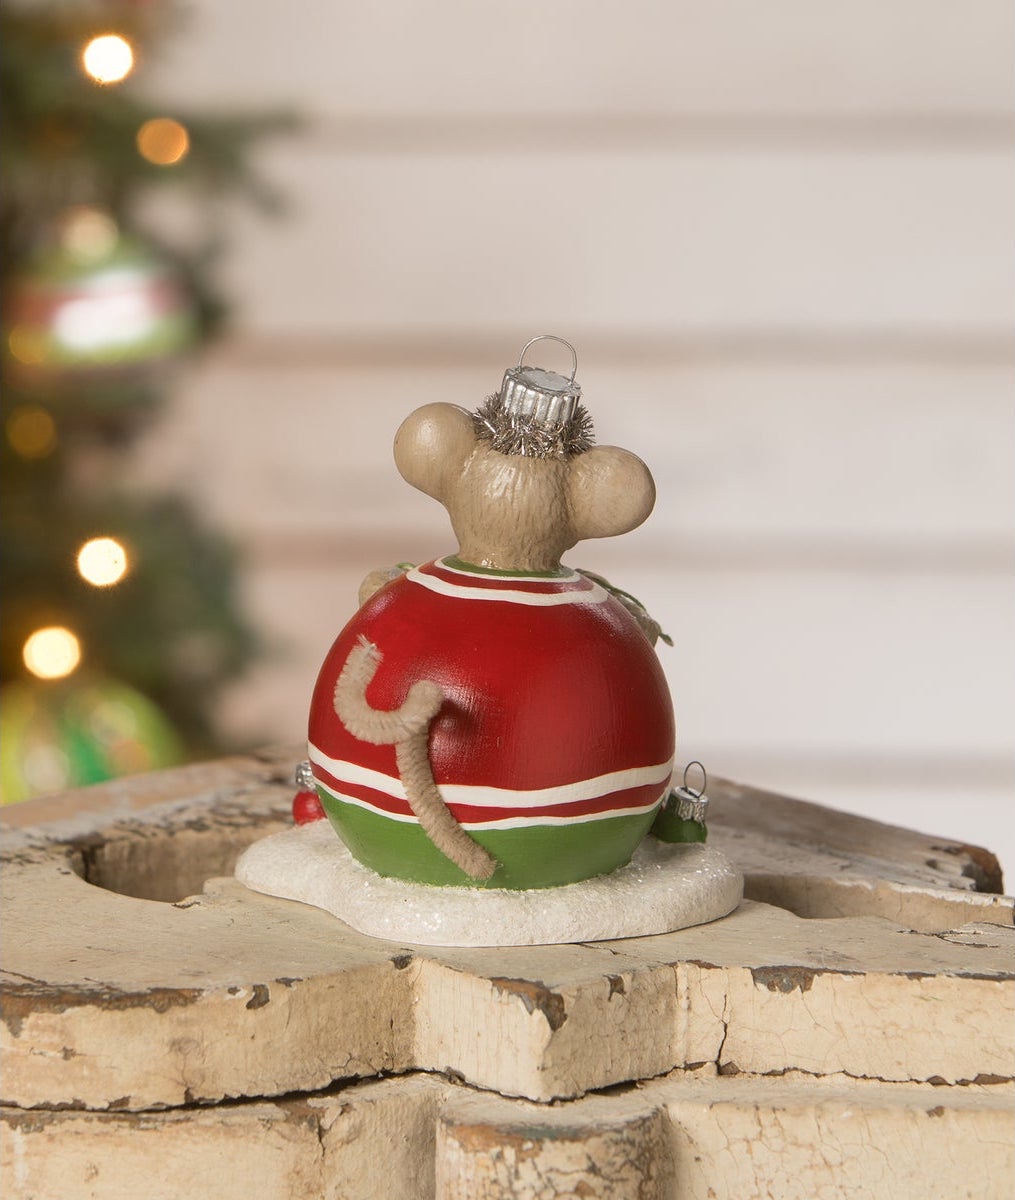 Cute Christmas Mice, Nibbles the Mouse in Ornament Figurine Tail